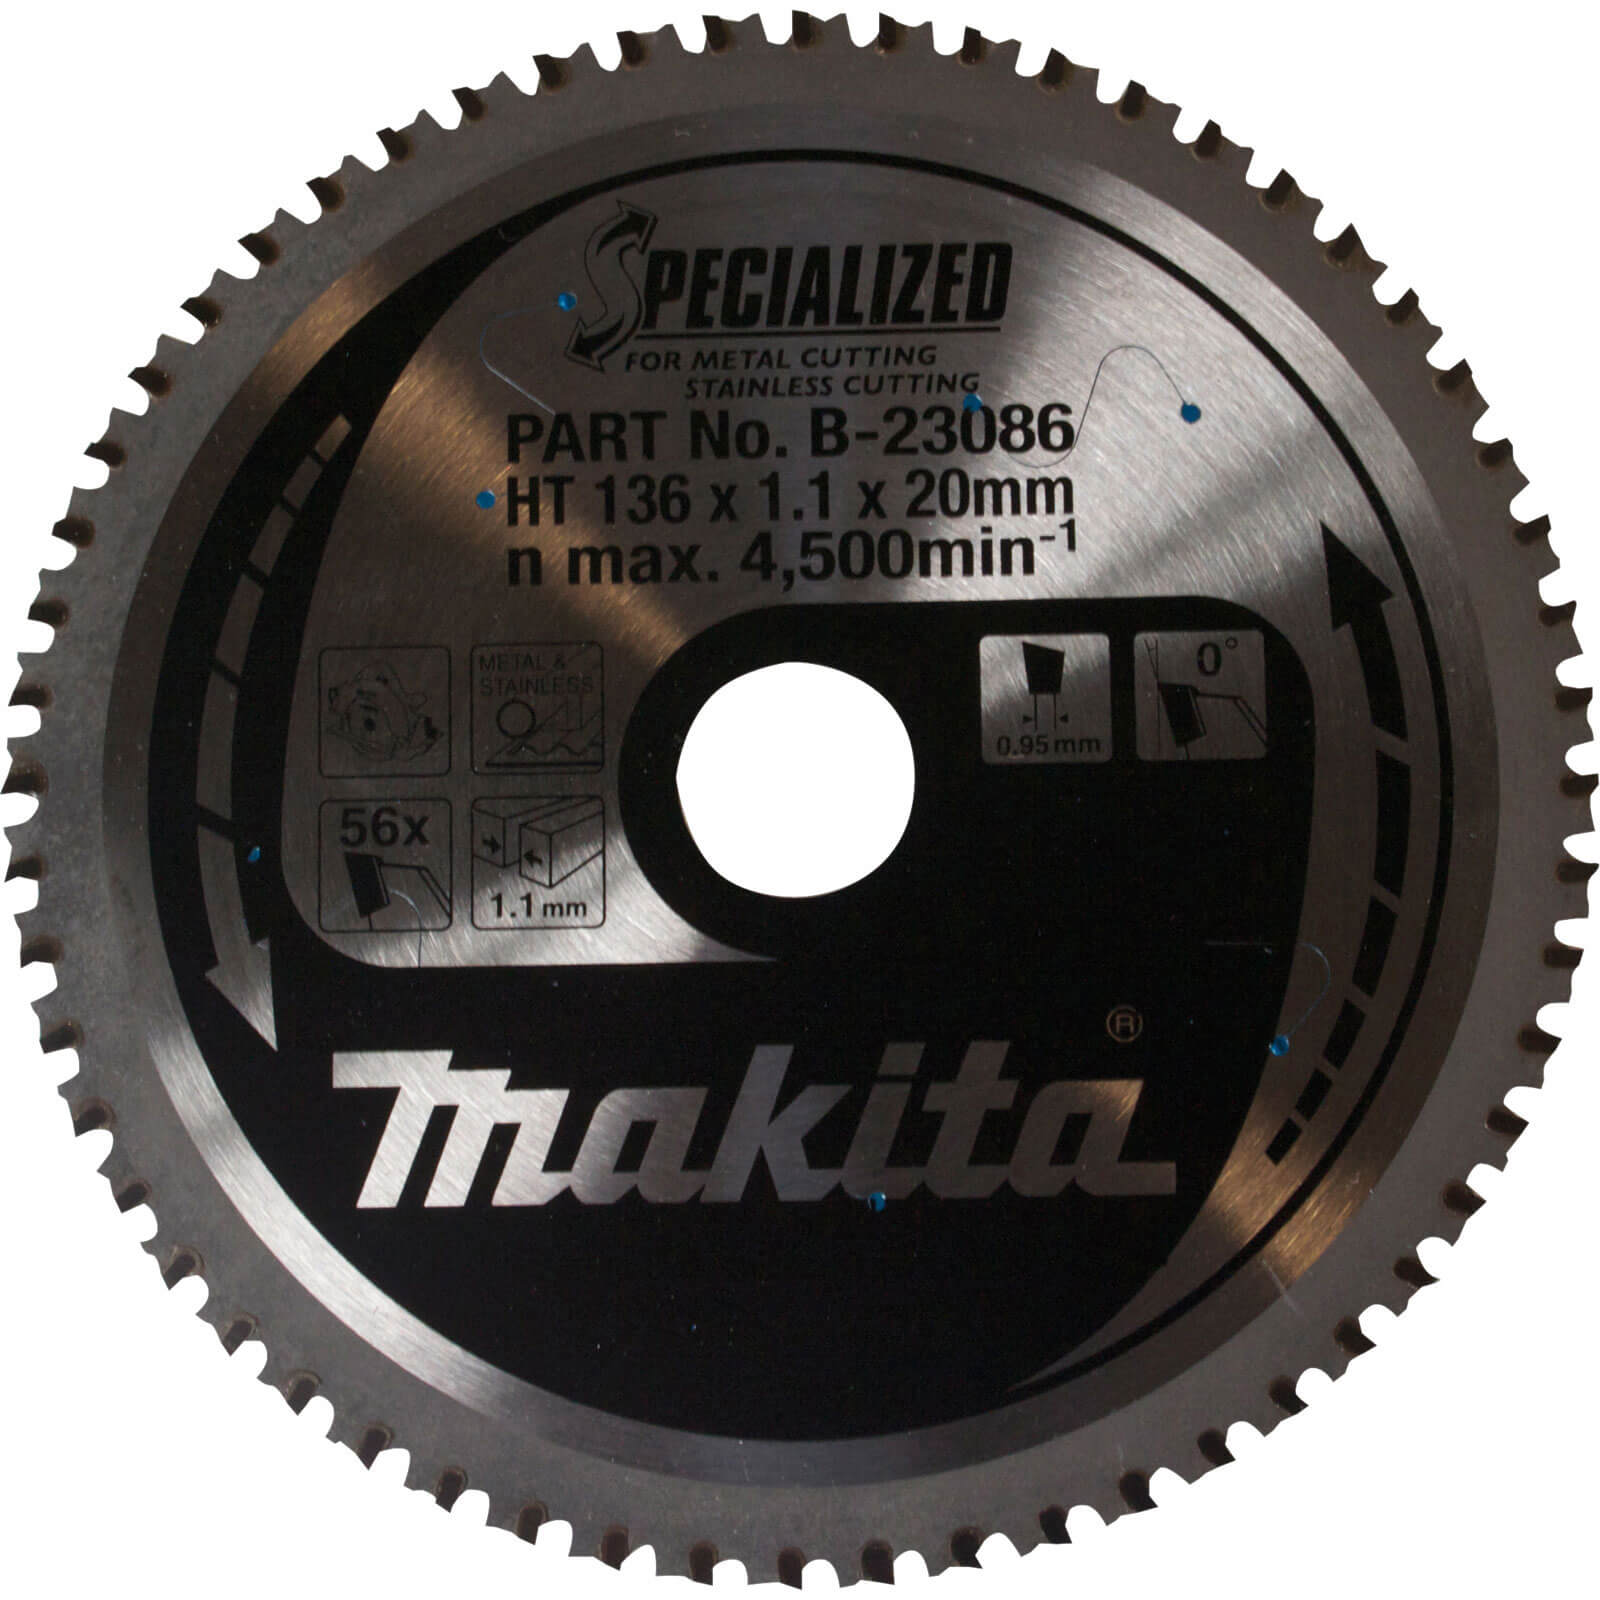 Photo of Makita Specialized Stainless Steel Cutting Saw Blade 136mm 56t 20mm